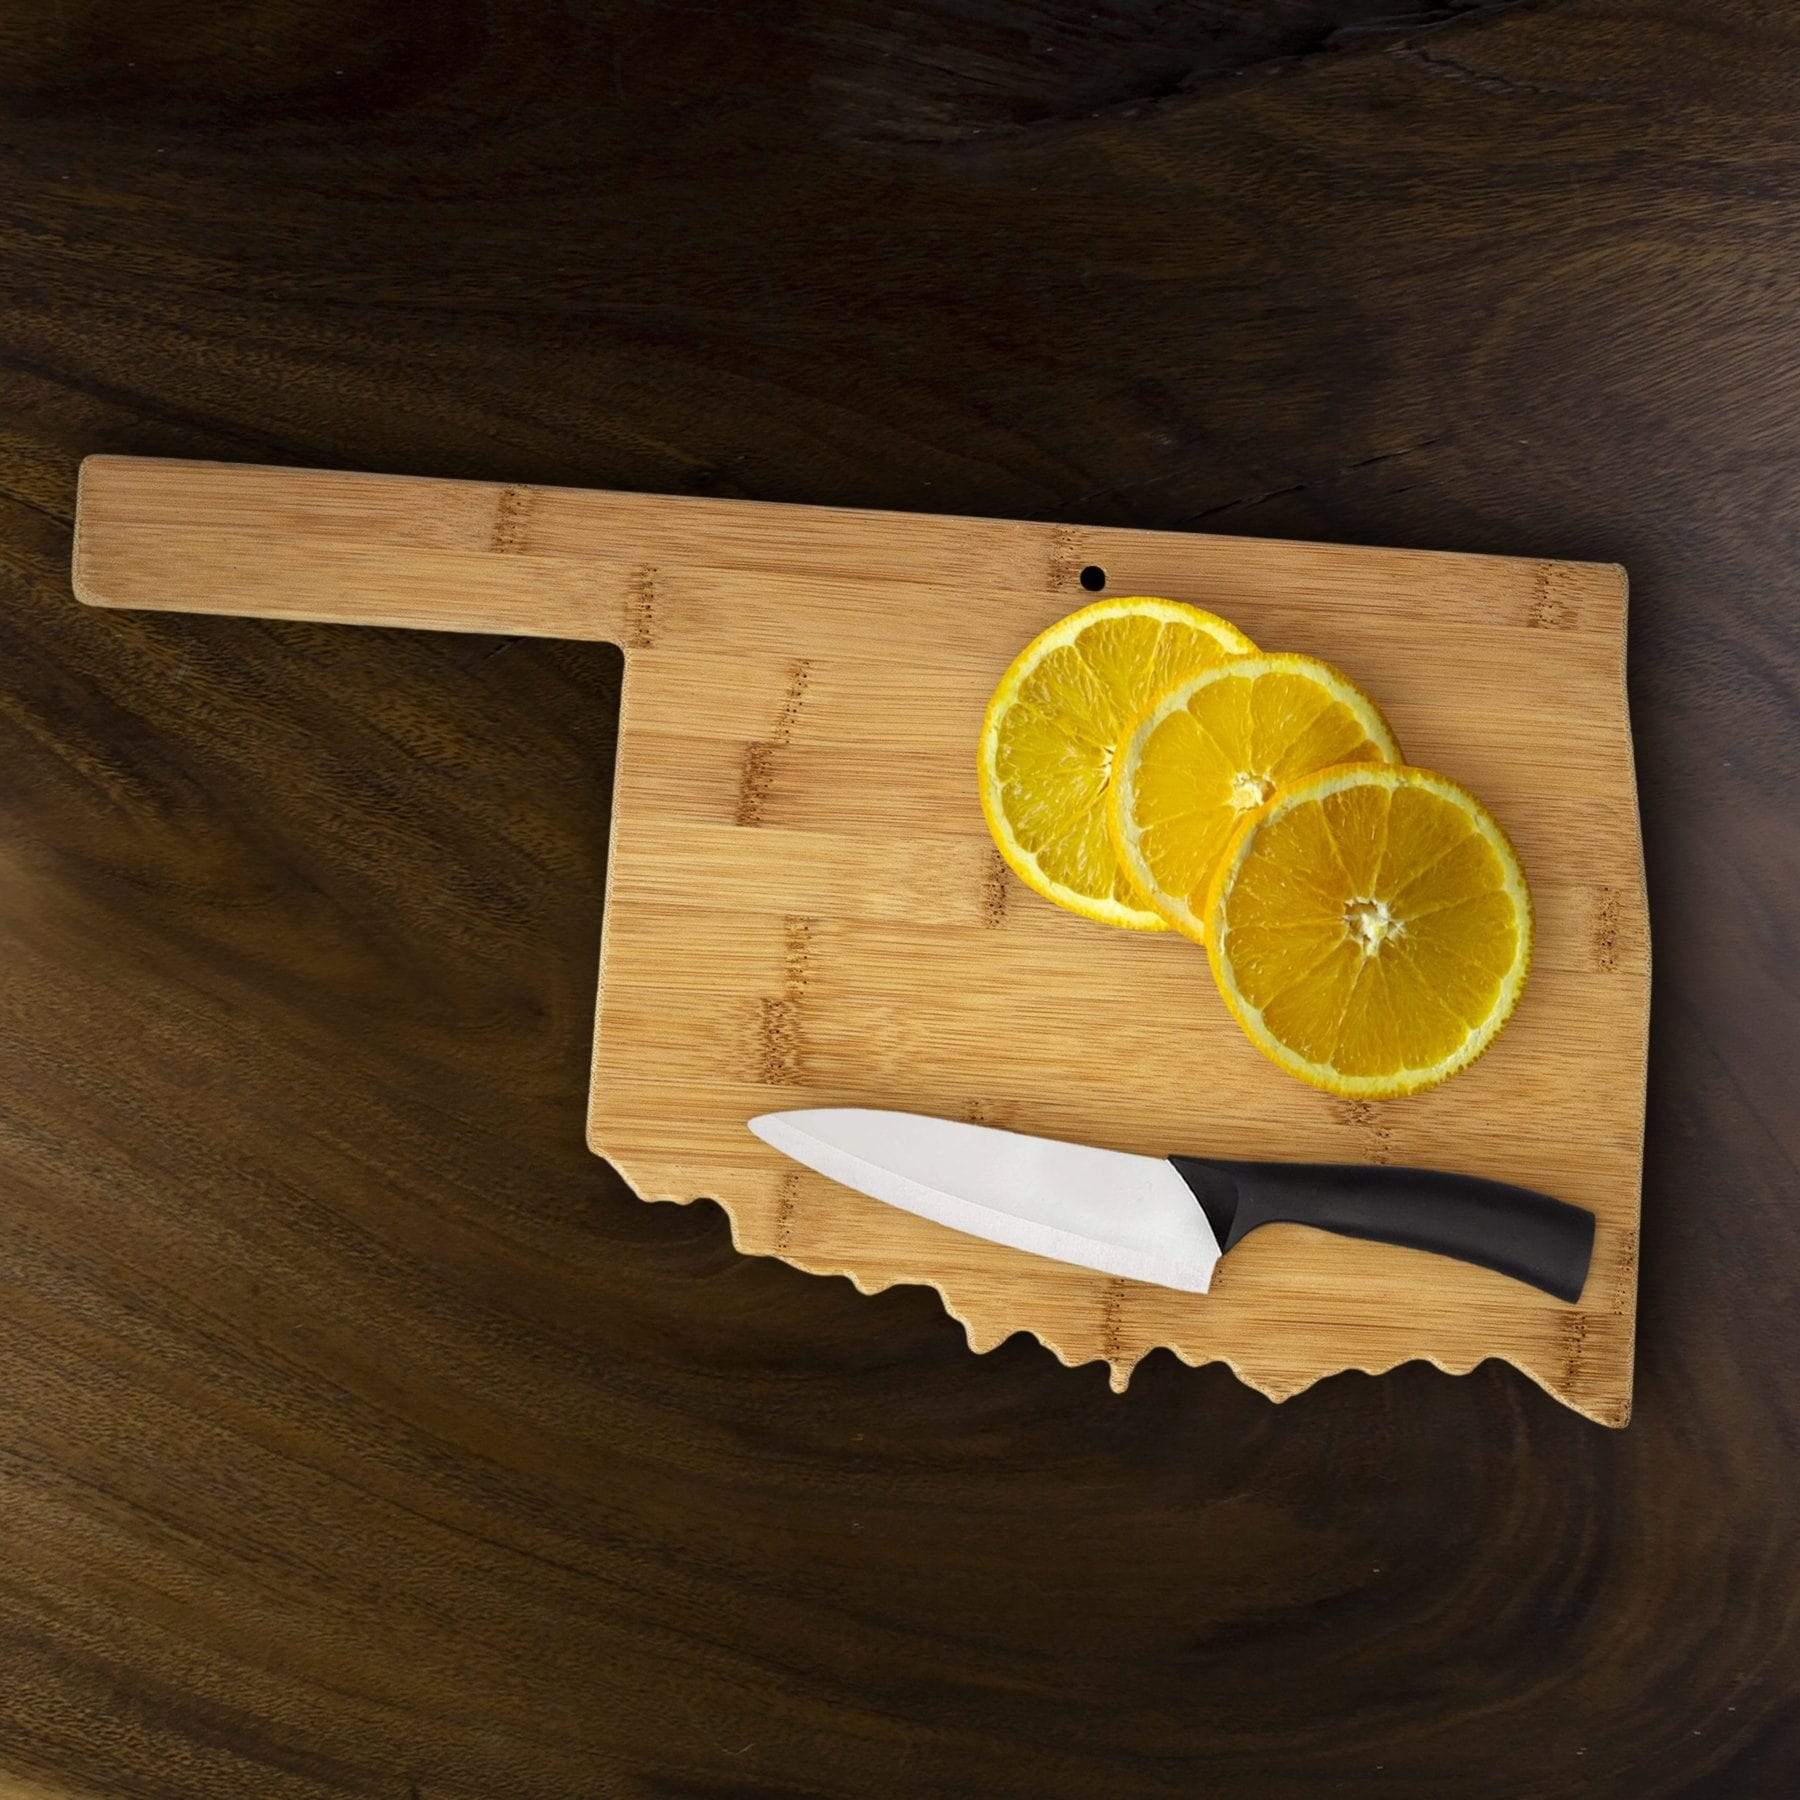 Totally Bamboo Oklahoma State Shaped Bamboo Serving and Cutting Board